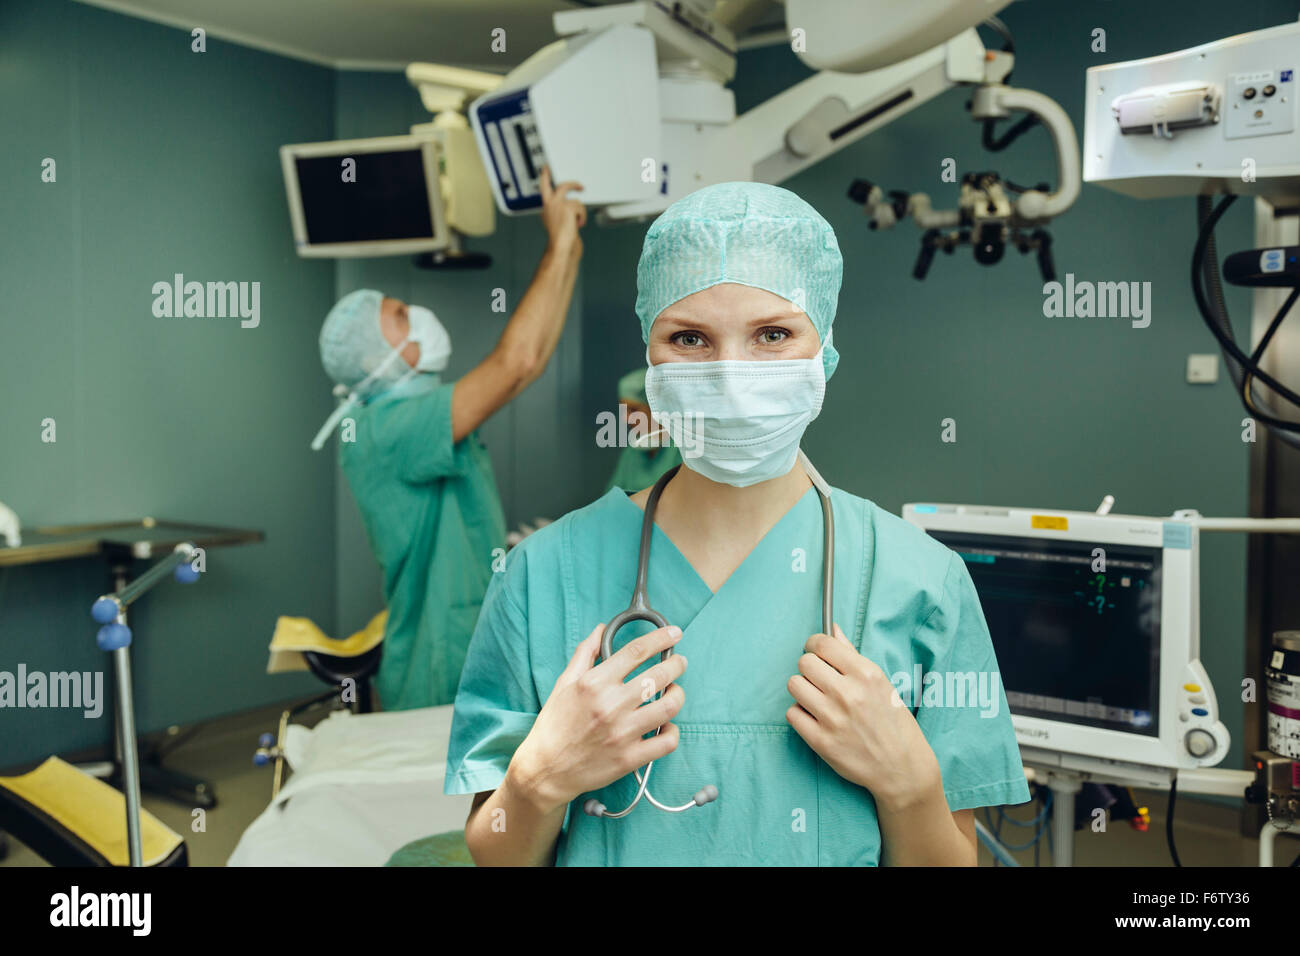 Portrait of smiling doctor in operating room Banque D'Images